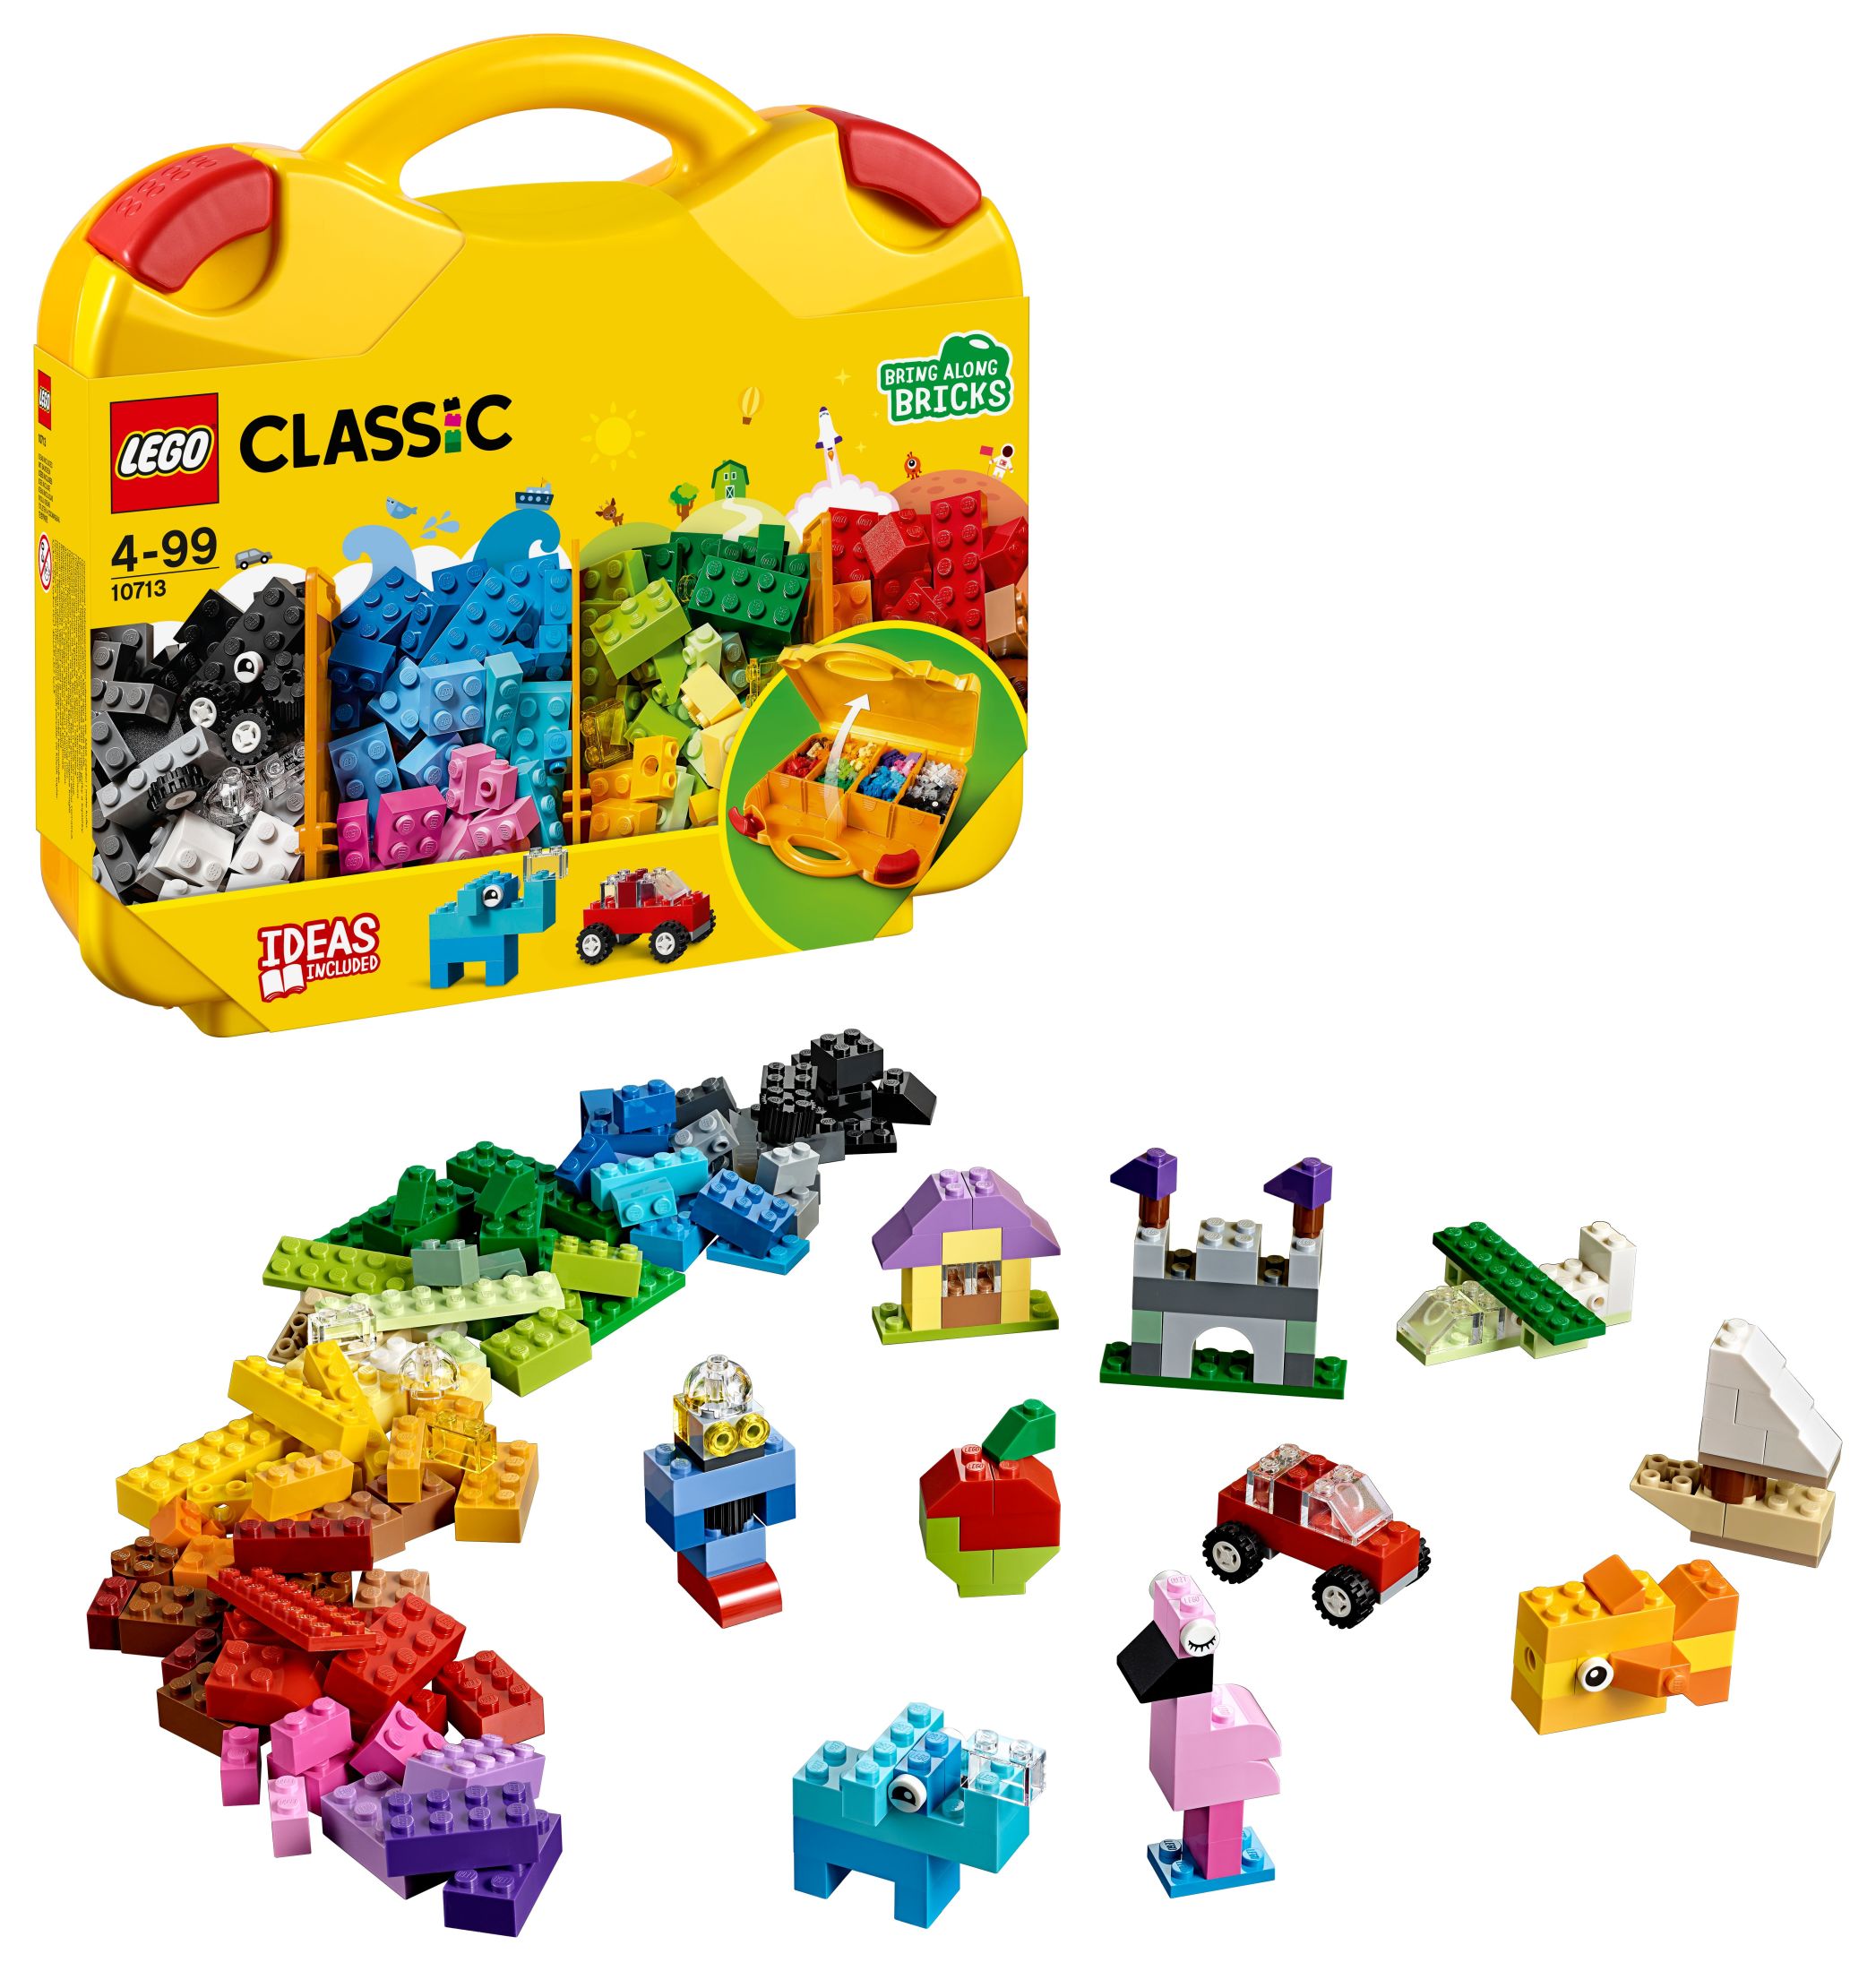 LEGO Classic Creative Suitcase 10713 - Includes Sorting Storage Organizer Case with Fun Colorful Building Bricks, Preschool Learning Toy for Kids to Play and Be Inspired by LEGO Masters - image 1 of 7